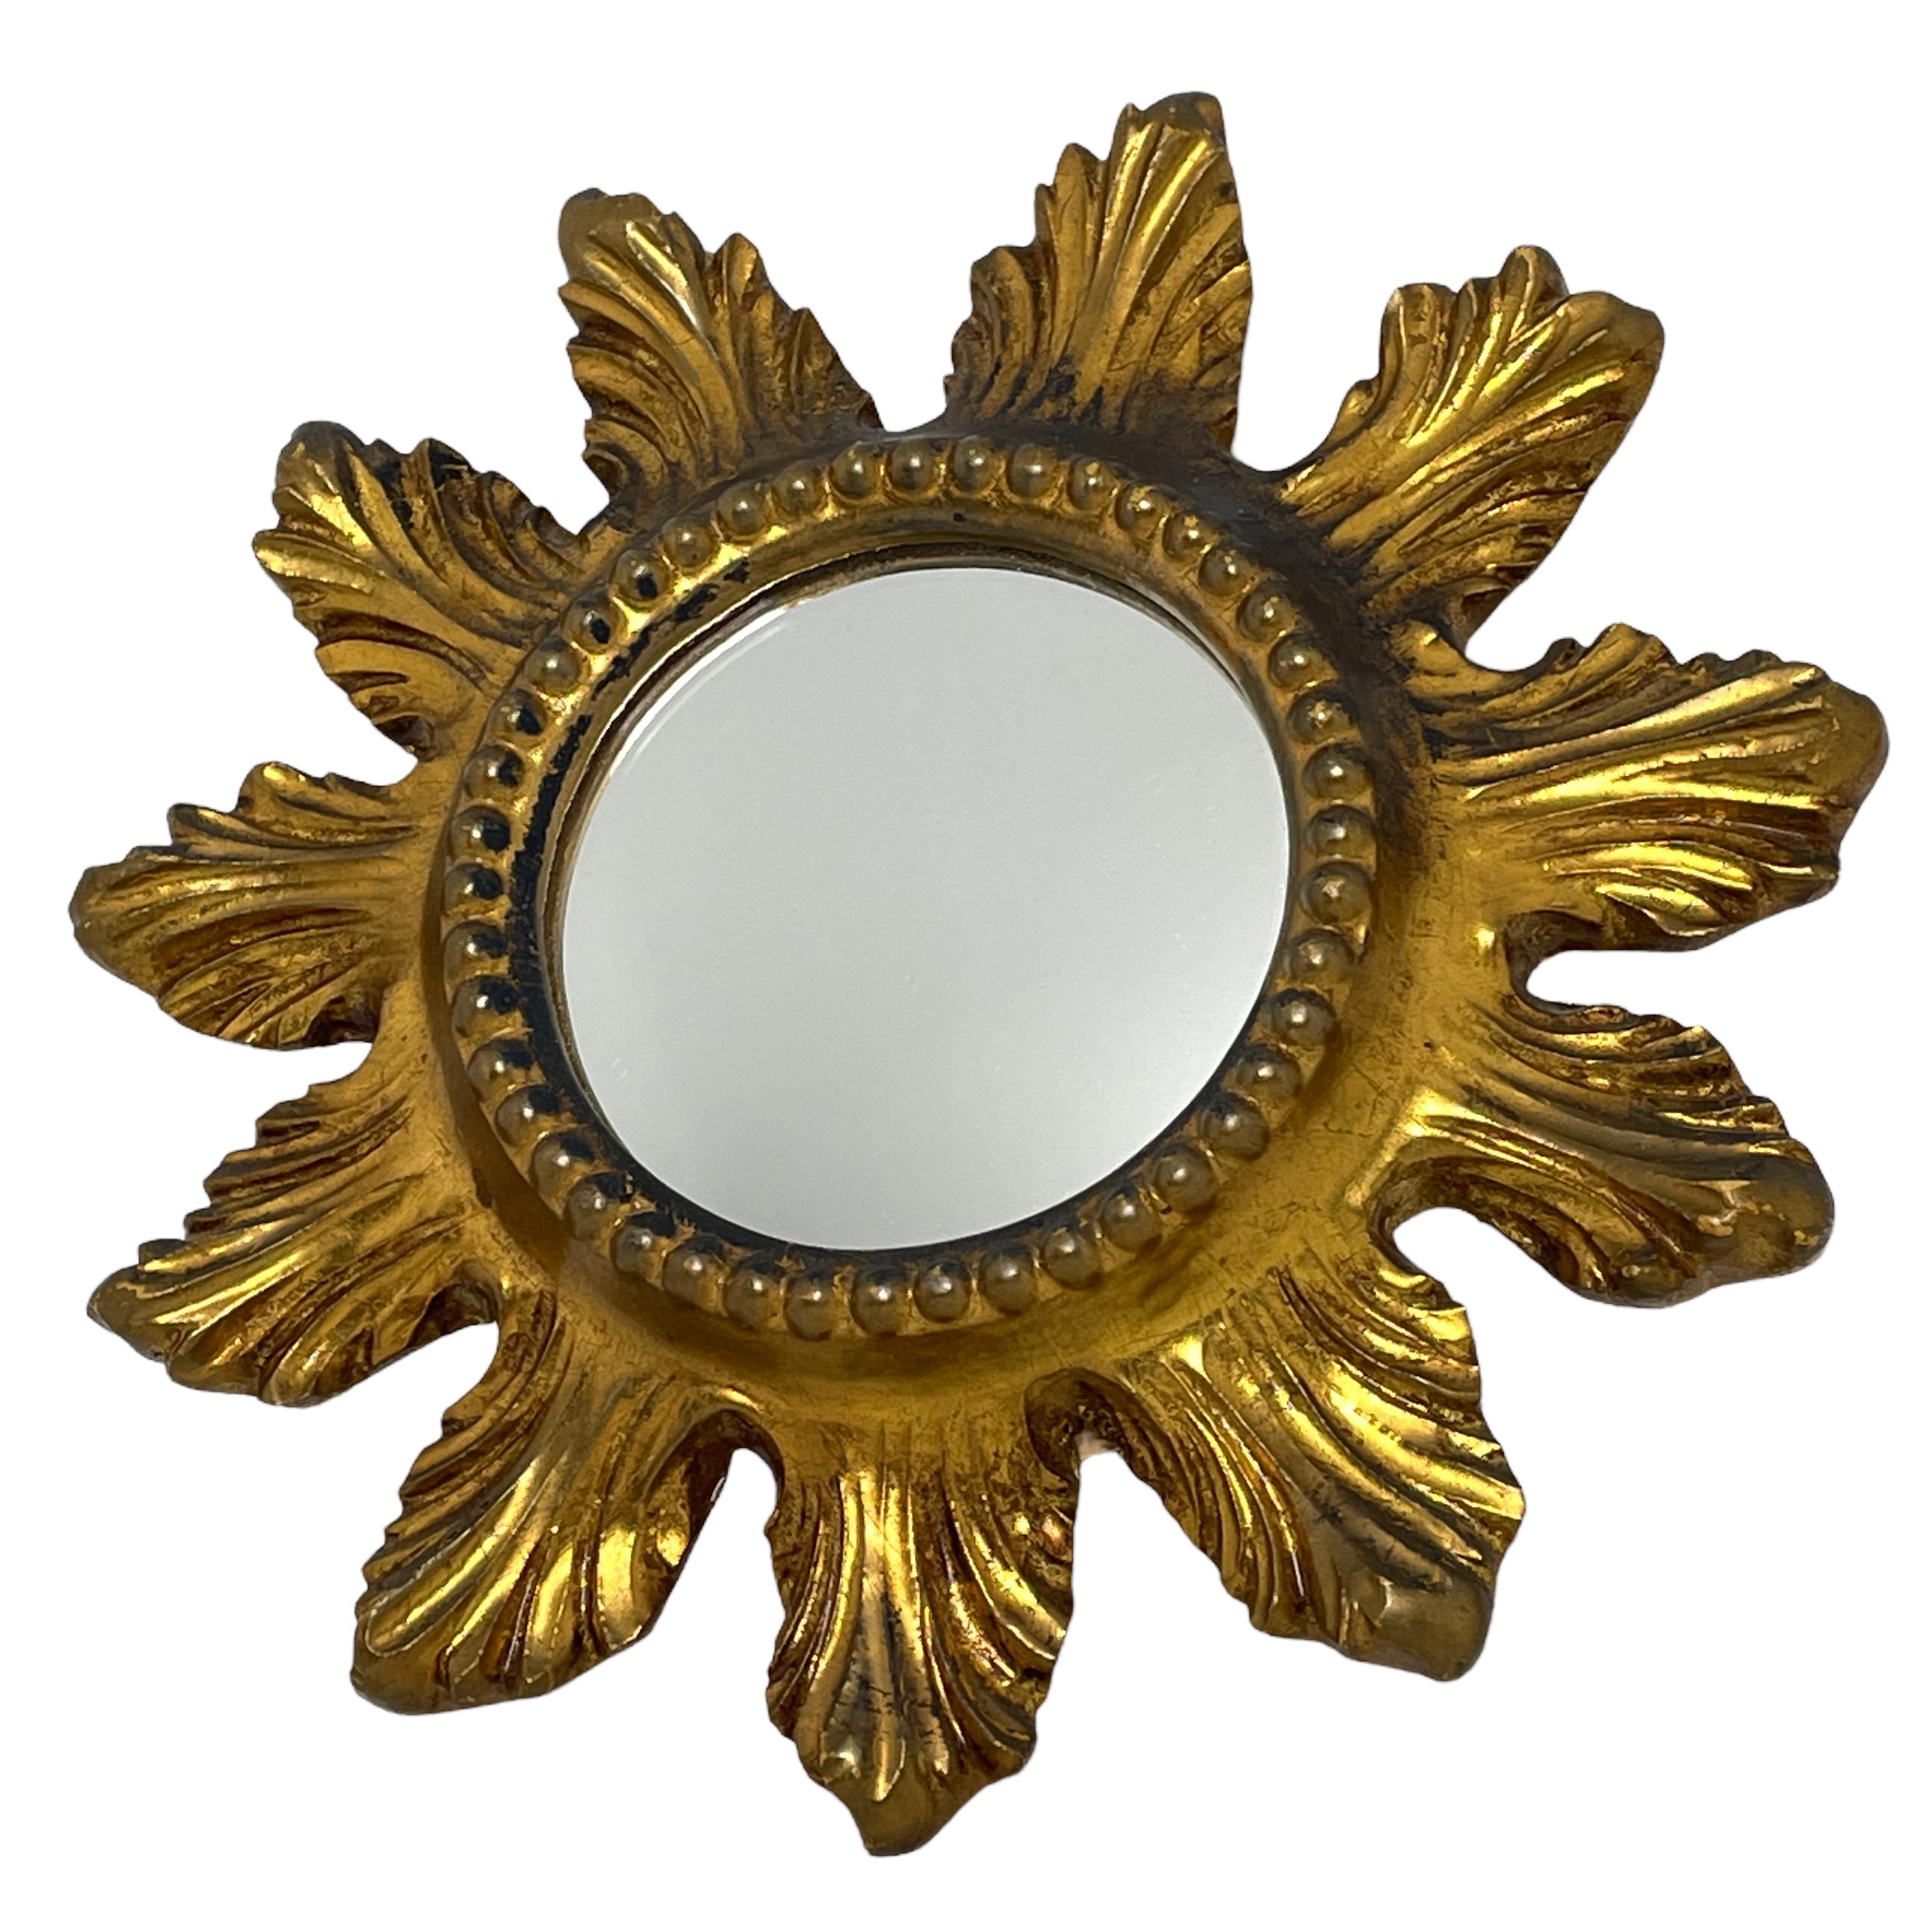 A gorgeous starburst mirror. Made of gilded wood and composition. No chips, no cracks, no repairs. It measures approximate 9